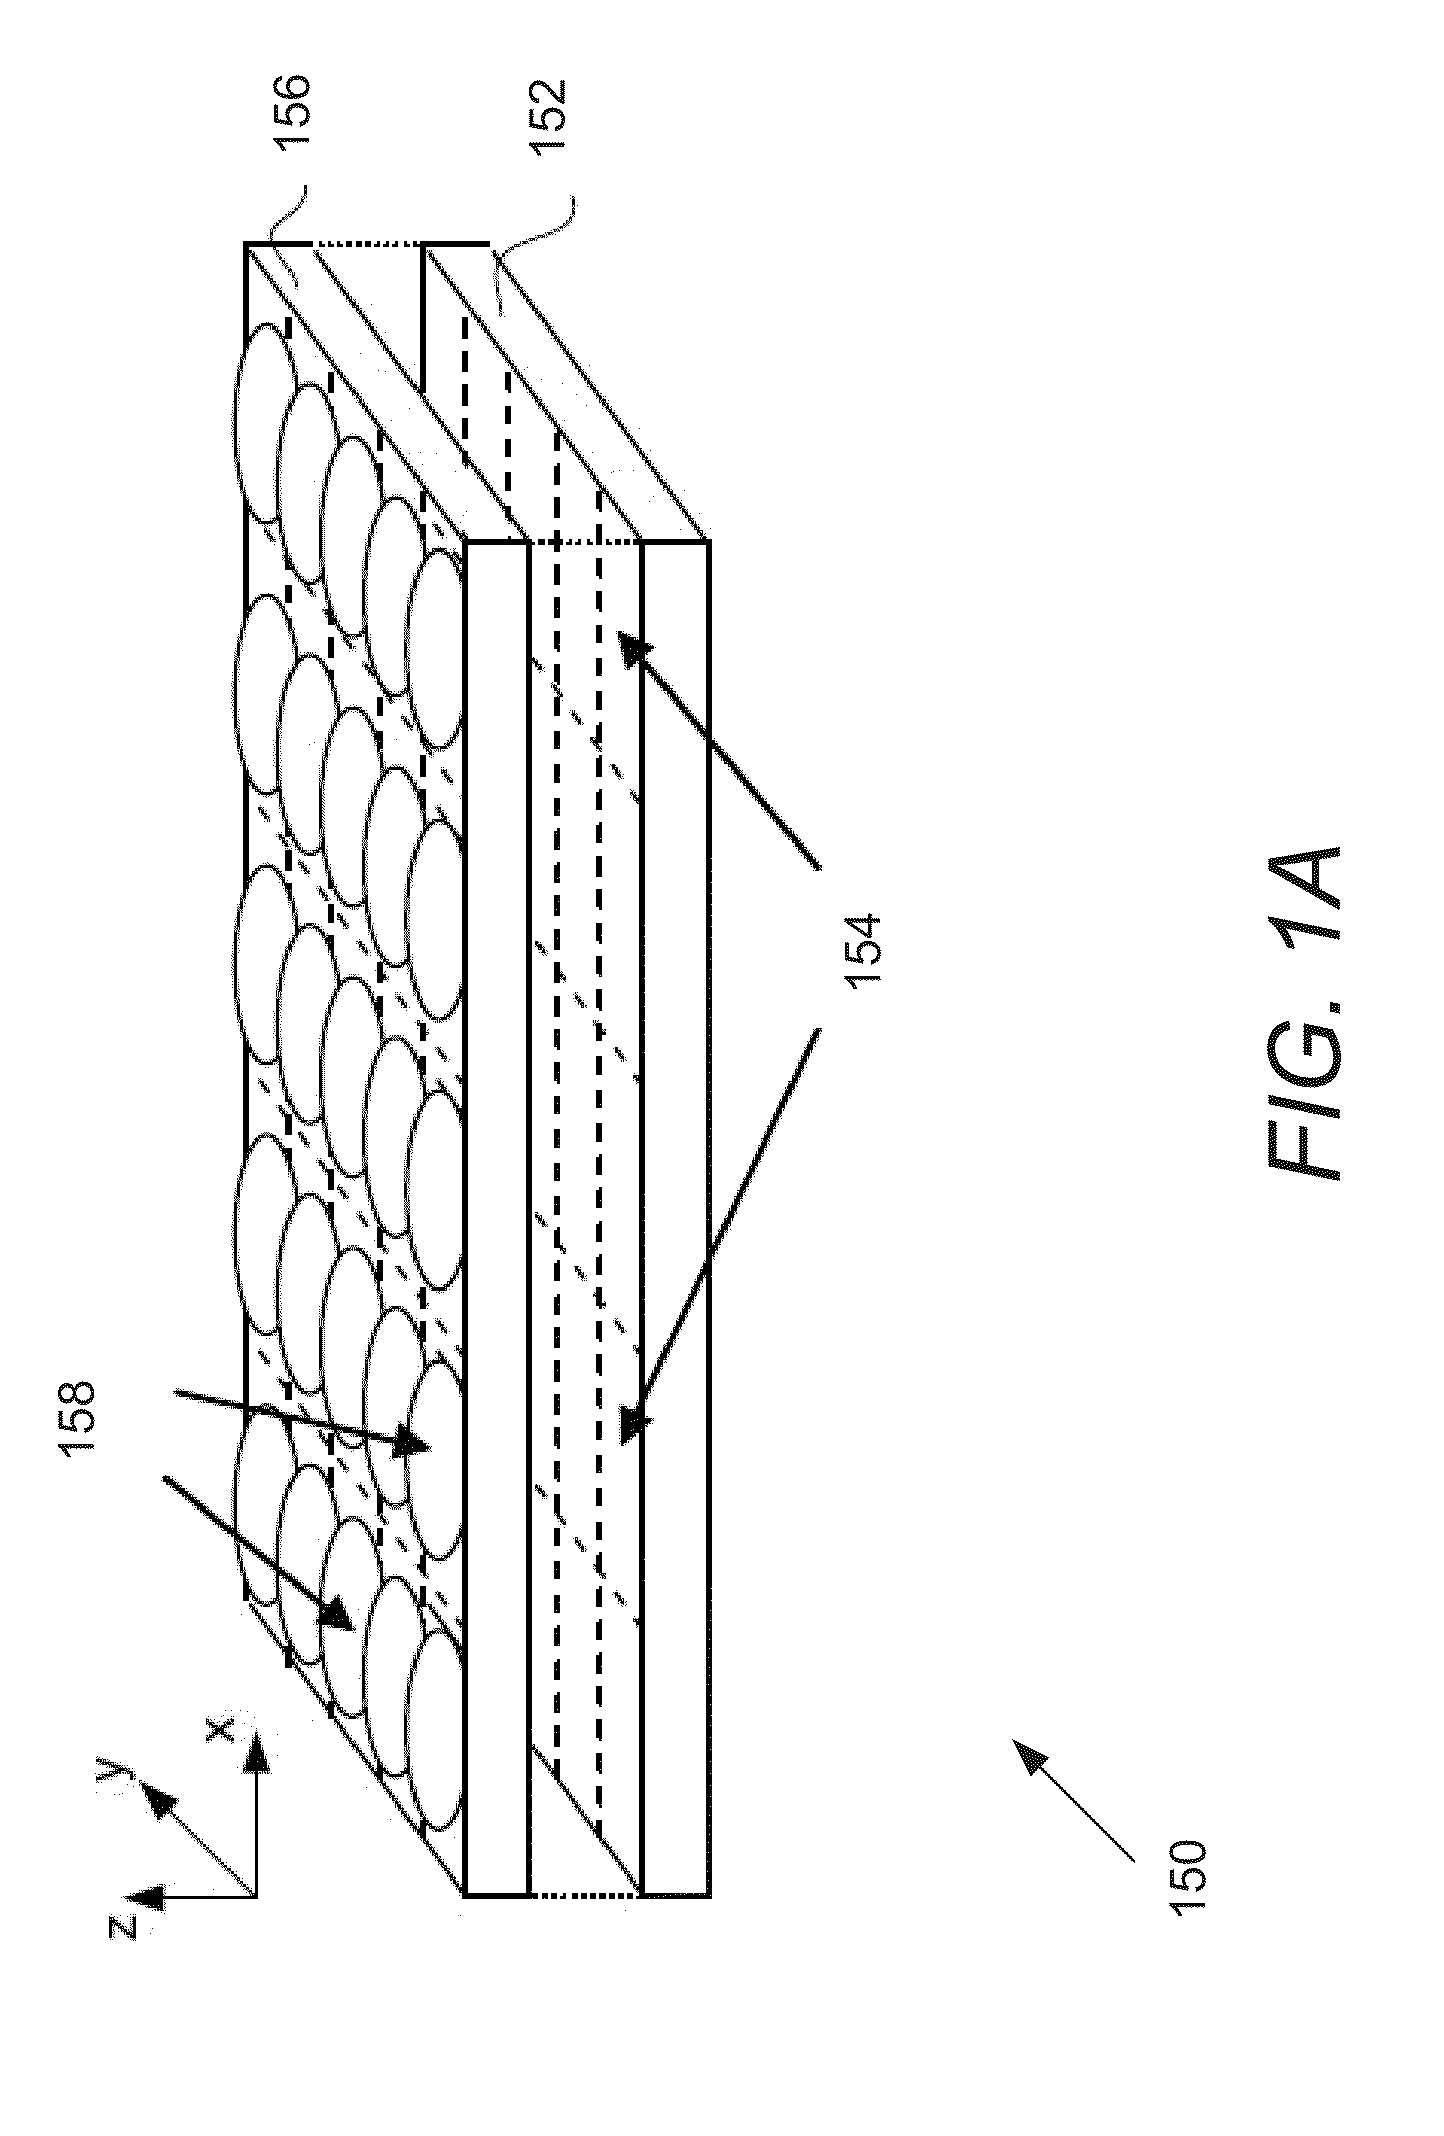 Systems and methods for parallax detection and correction in images captured using array cameras that contain occlusions using subsets of images to perform depth estimation